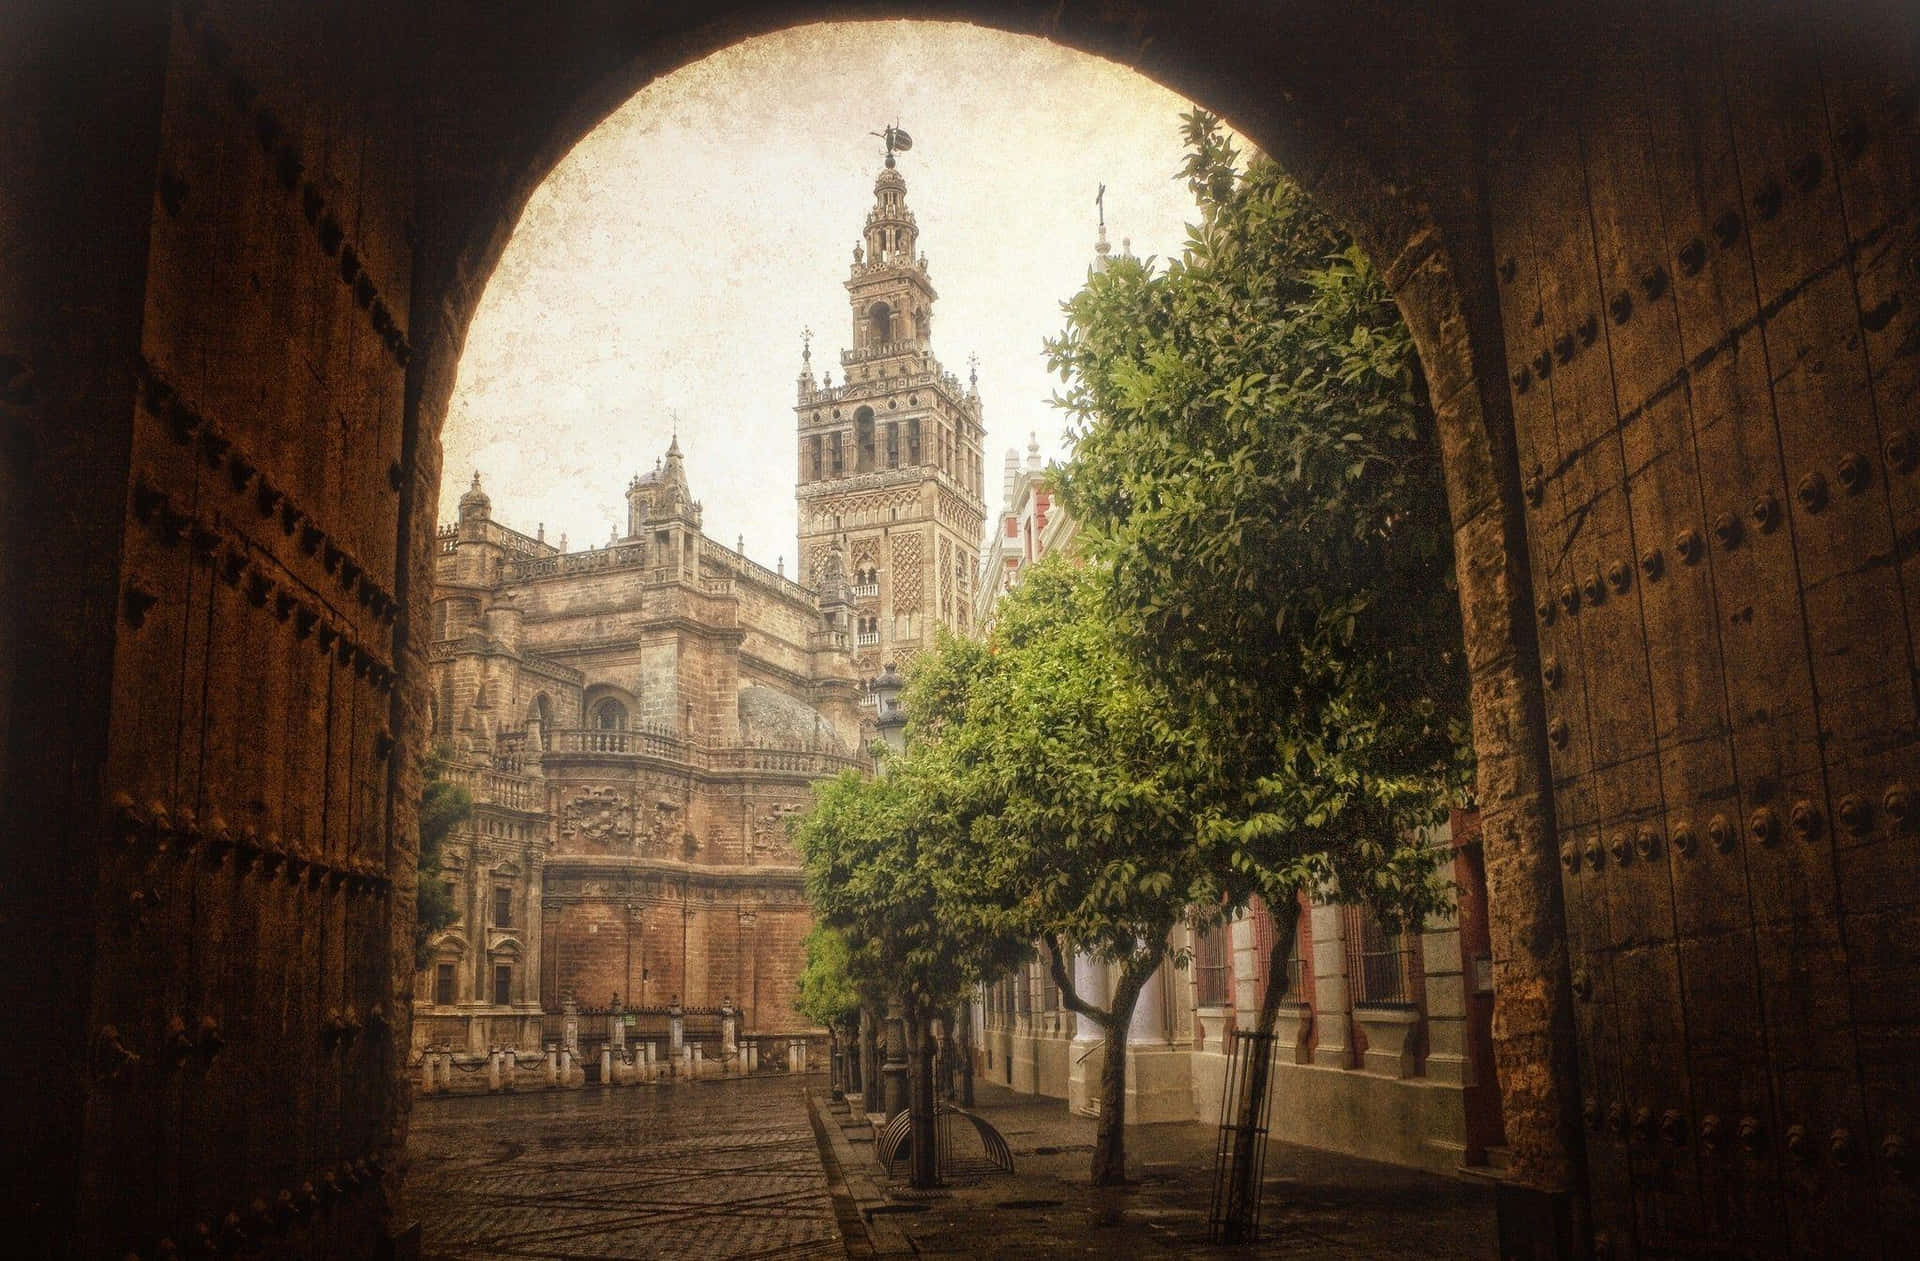 Historic Seville Cathedral Textured Image Wallpaper